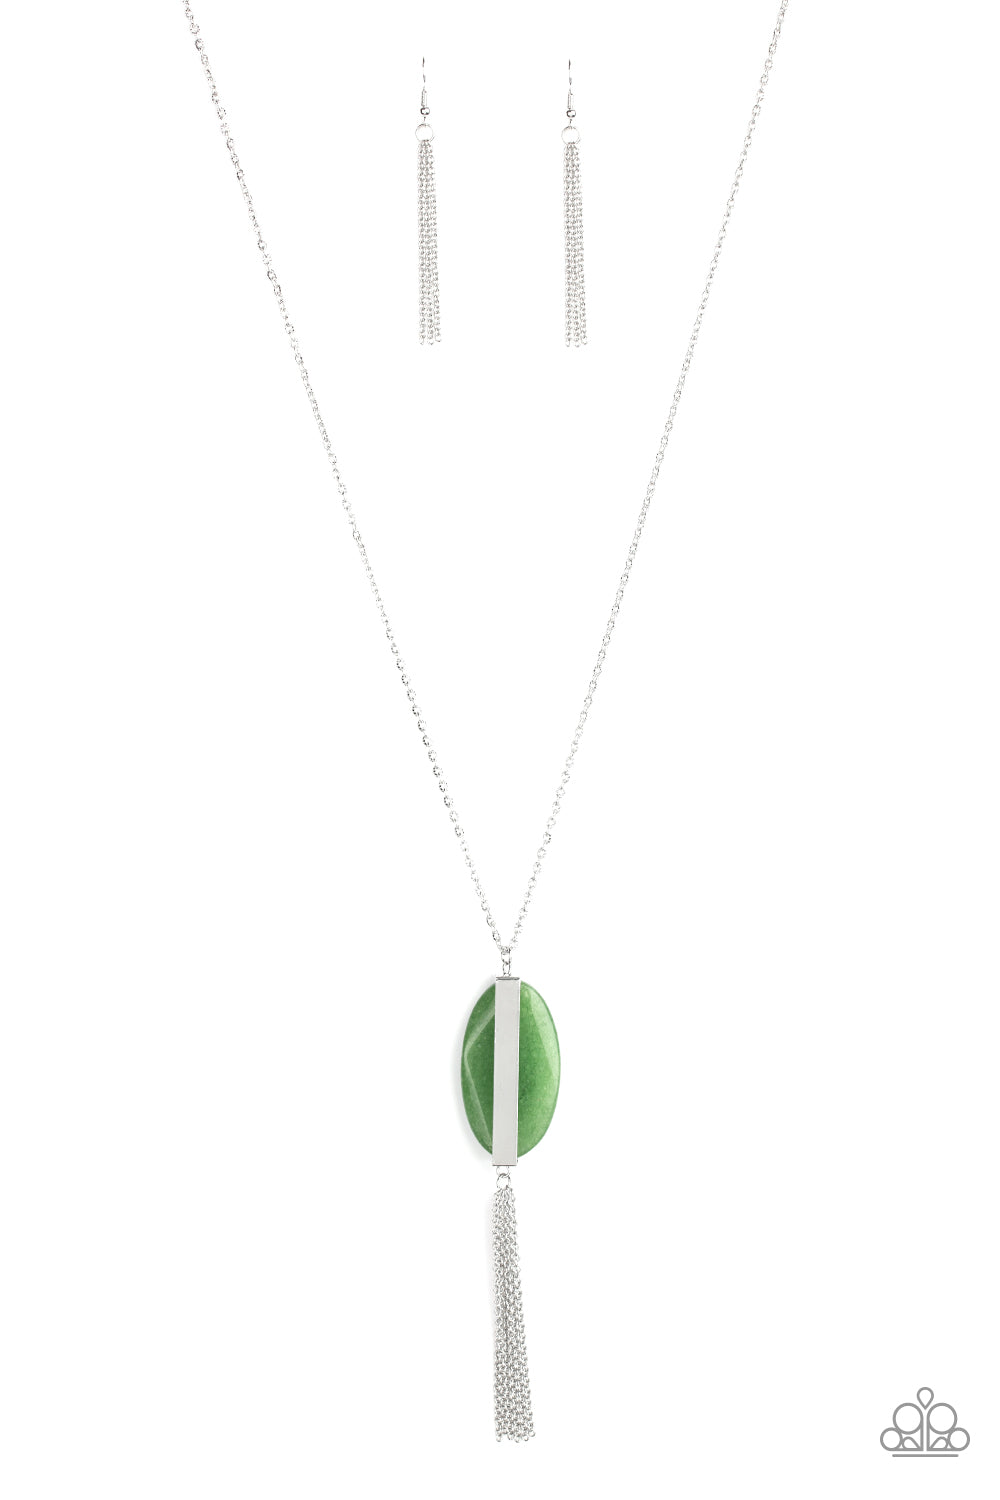 Paparazzi Tranquility Trend Green Long Necklace